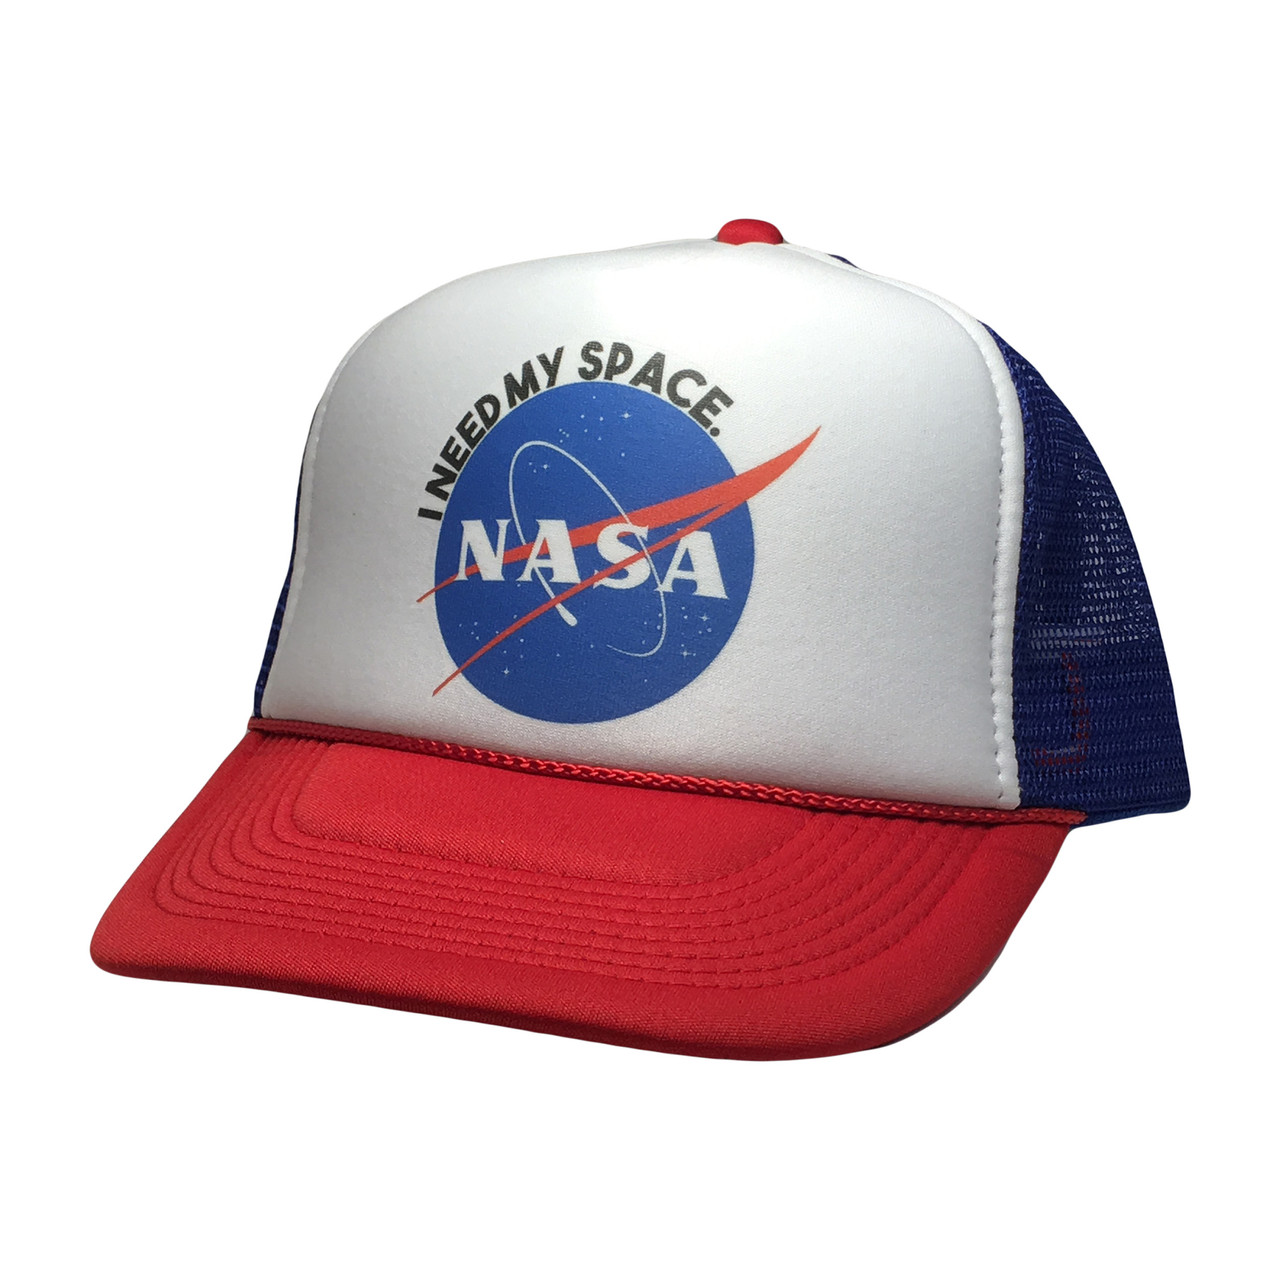 I Need My Space NASA Trucker Hat, I Need My Space NASA Hat, I Need My Space  NASA, Trucker Hat, NASA Hat, Mesh Hat, Snap Back Hat, Adjustable Hat